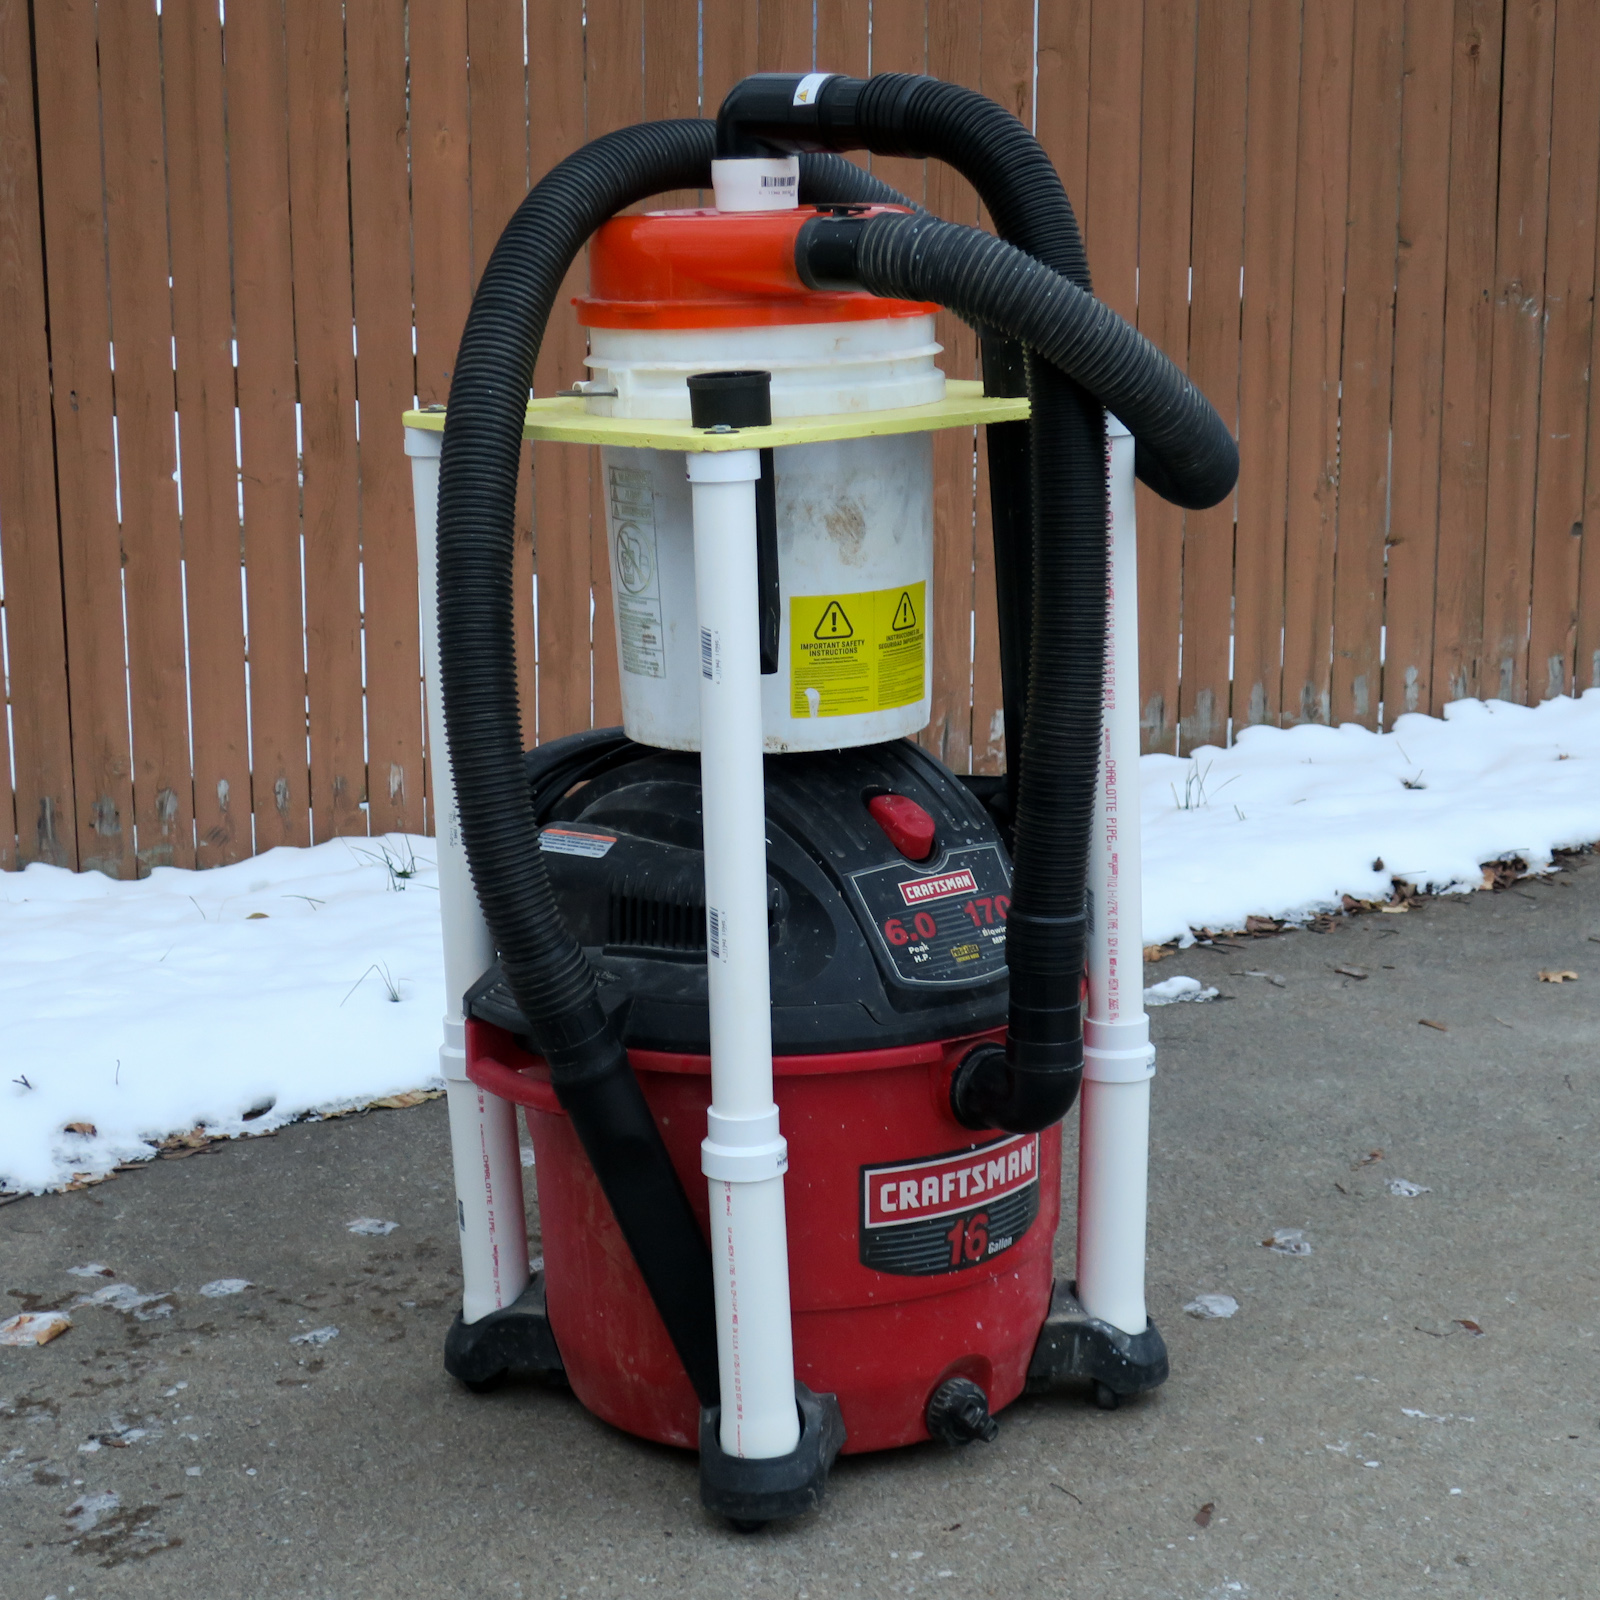 Dust Collection Cart for a Shop Vac and Dustopper